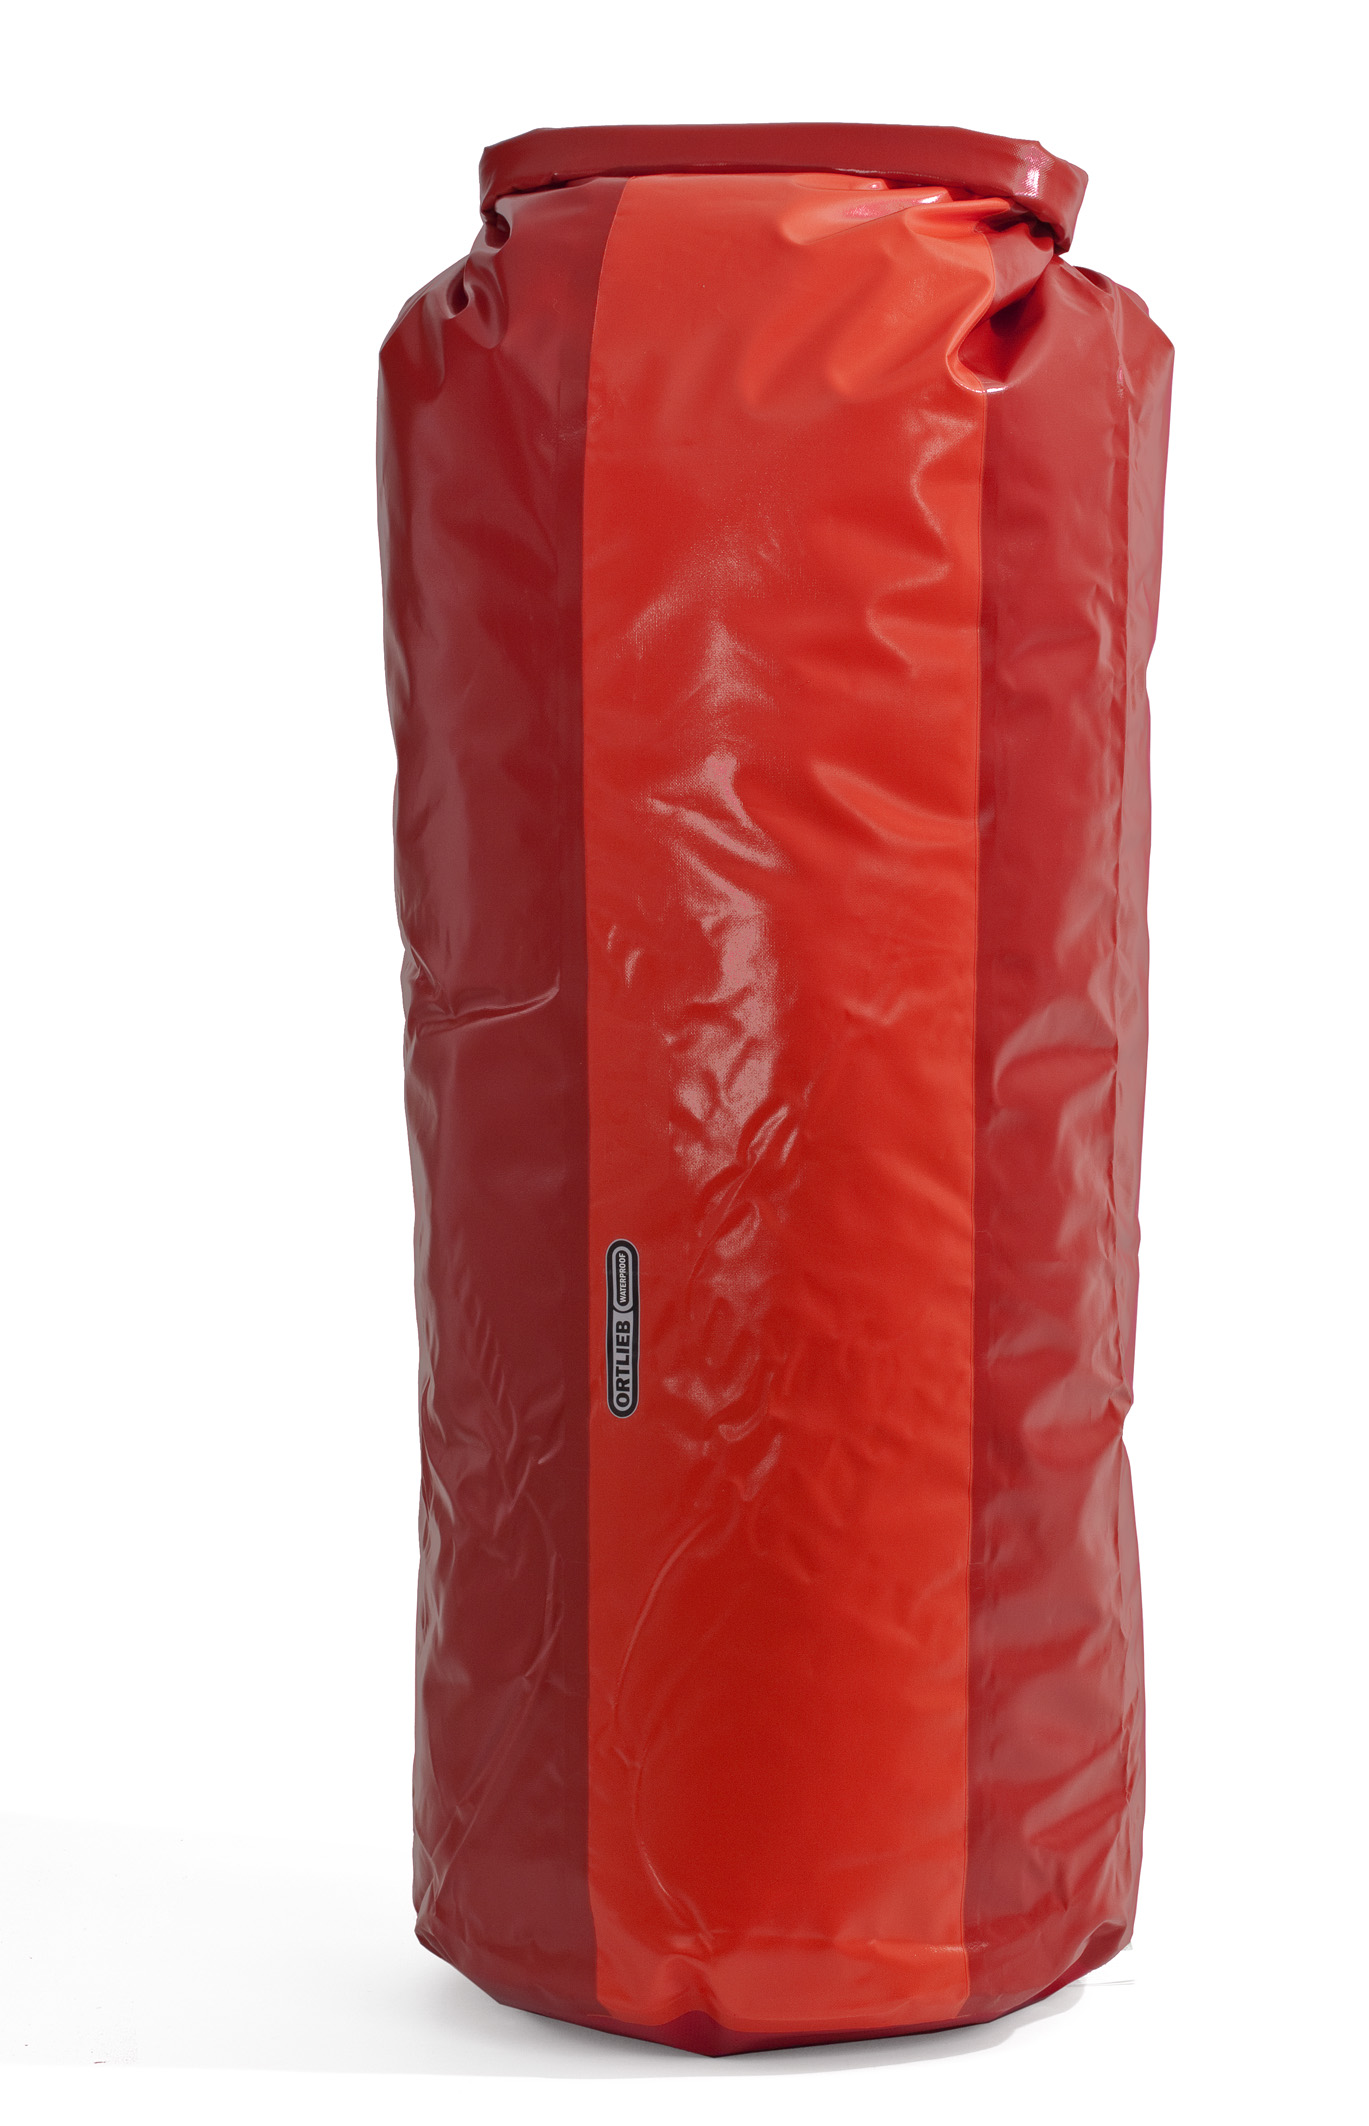 Ortlieb "Dry-Bag PD350" - Cranberry